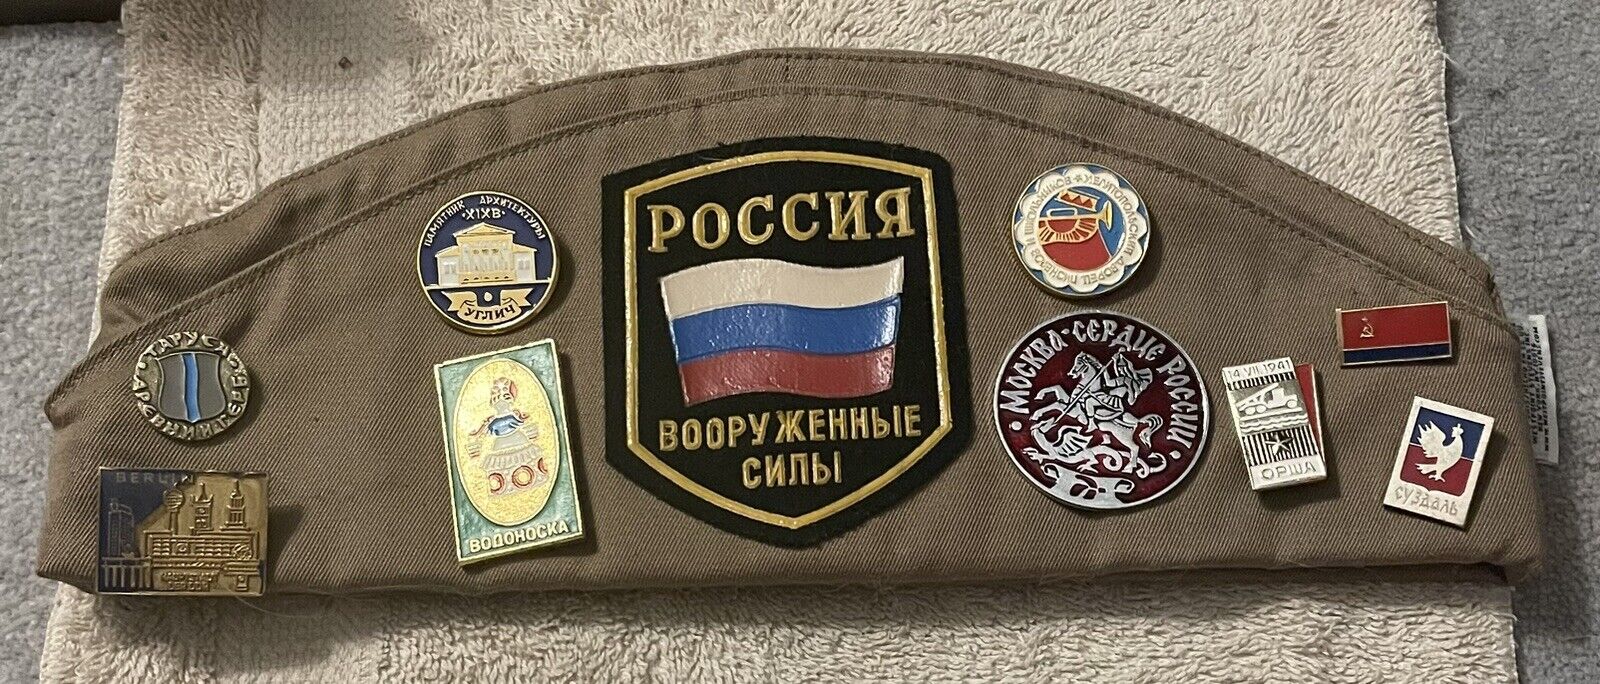 Vintage Soviet Union Russian Military Cap With Patches And Badges